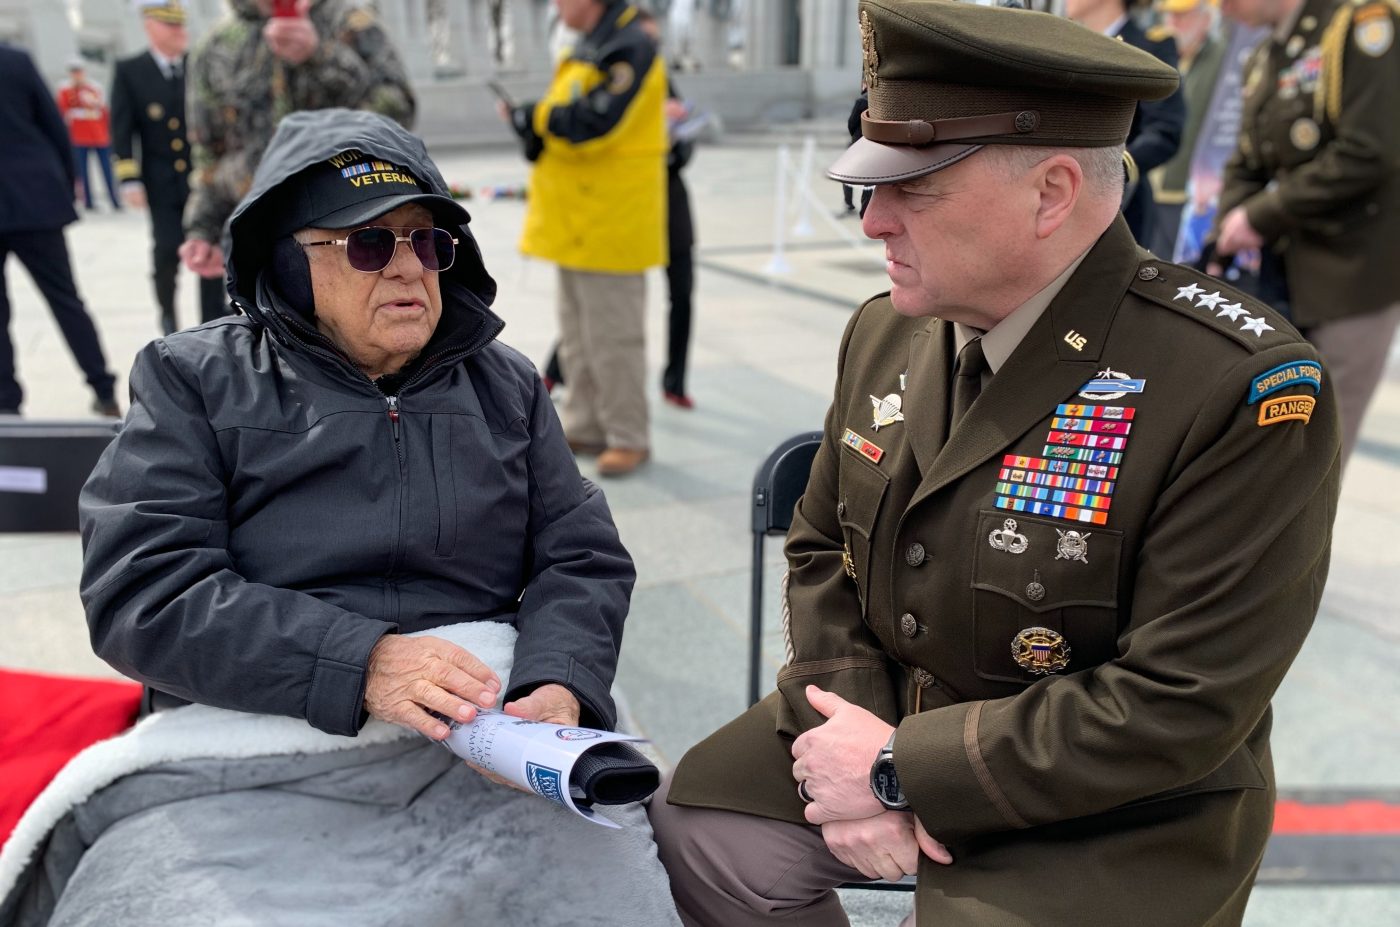 World War II Army Air Forces Veteran Constantine Rizopoulos, 91, talks to Army Gen. Mark Milley, chairman of the Joint Chiefs of Staff, at the Battle of Iwo Jima 75th Anniversary Commemoration Feb. 19 at the National World War II Memorial in Washington, D.C.